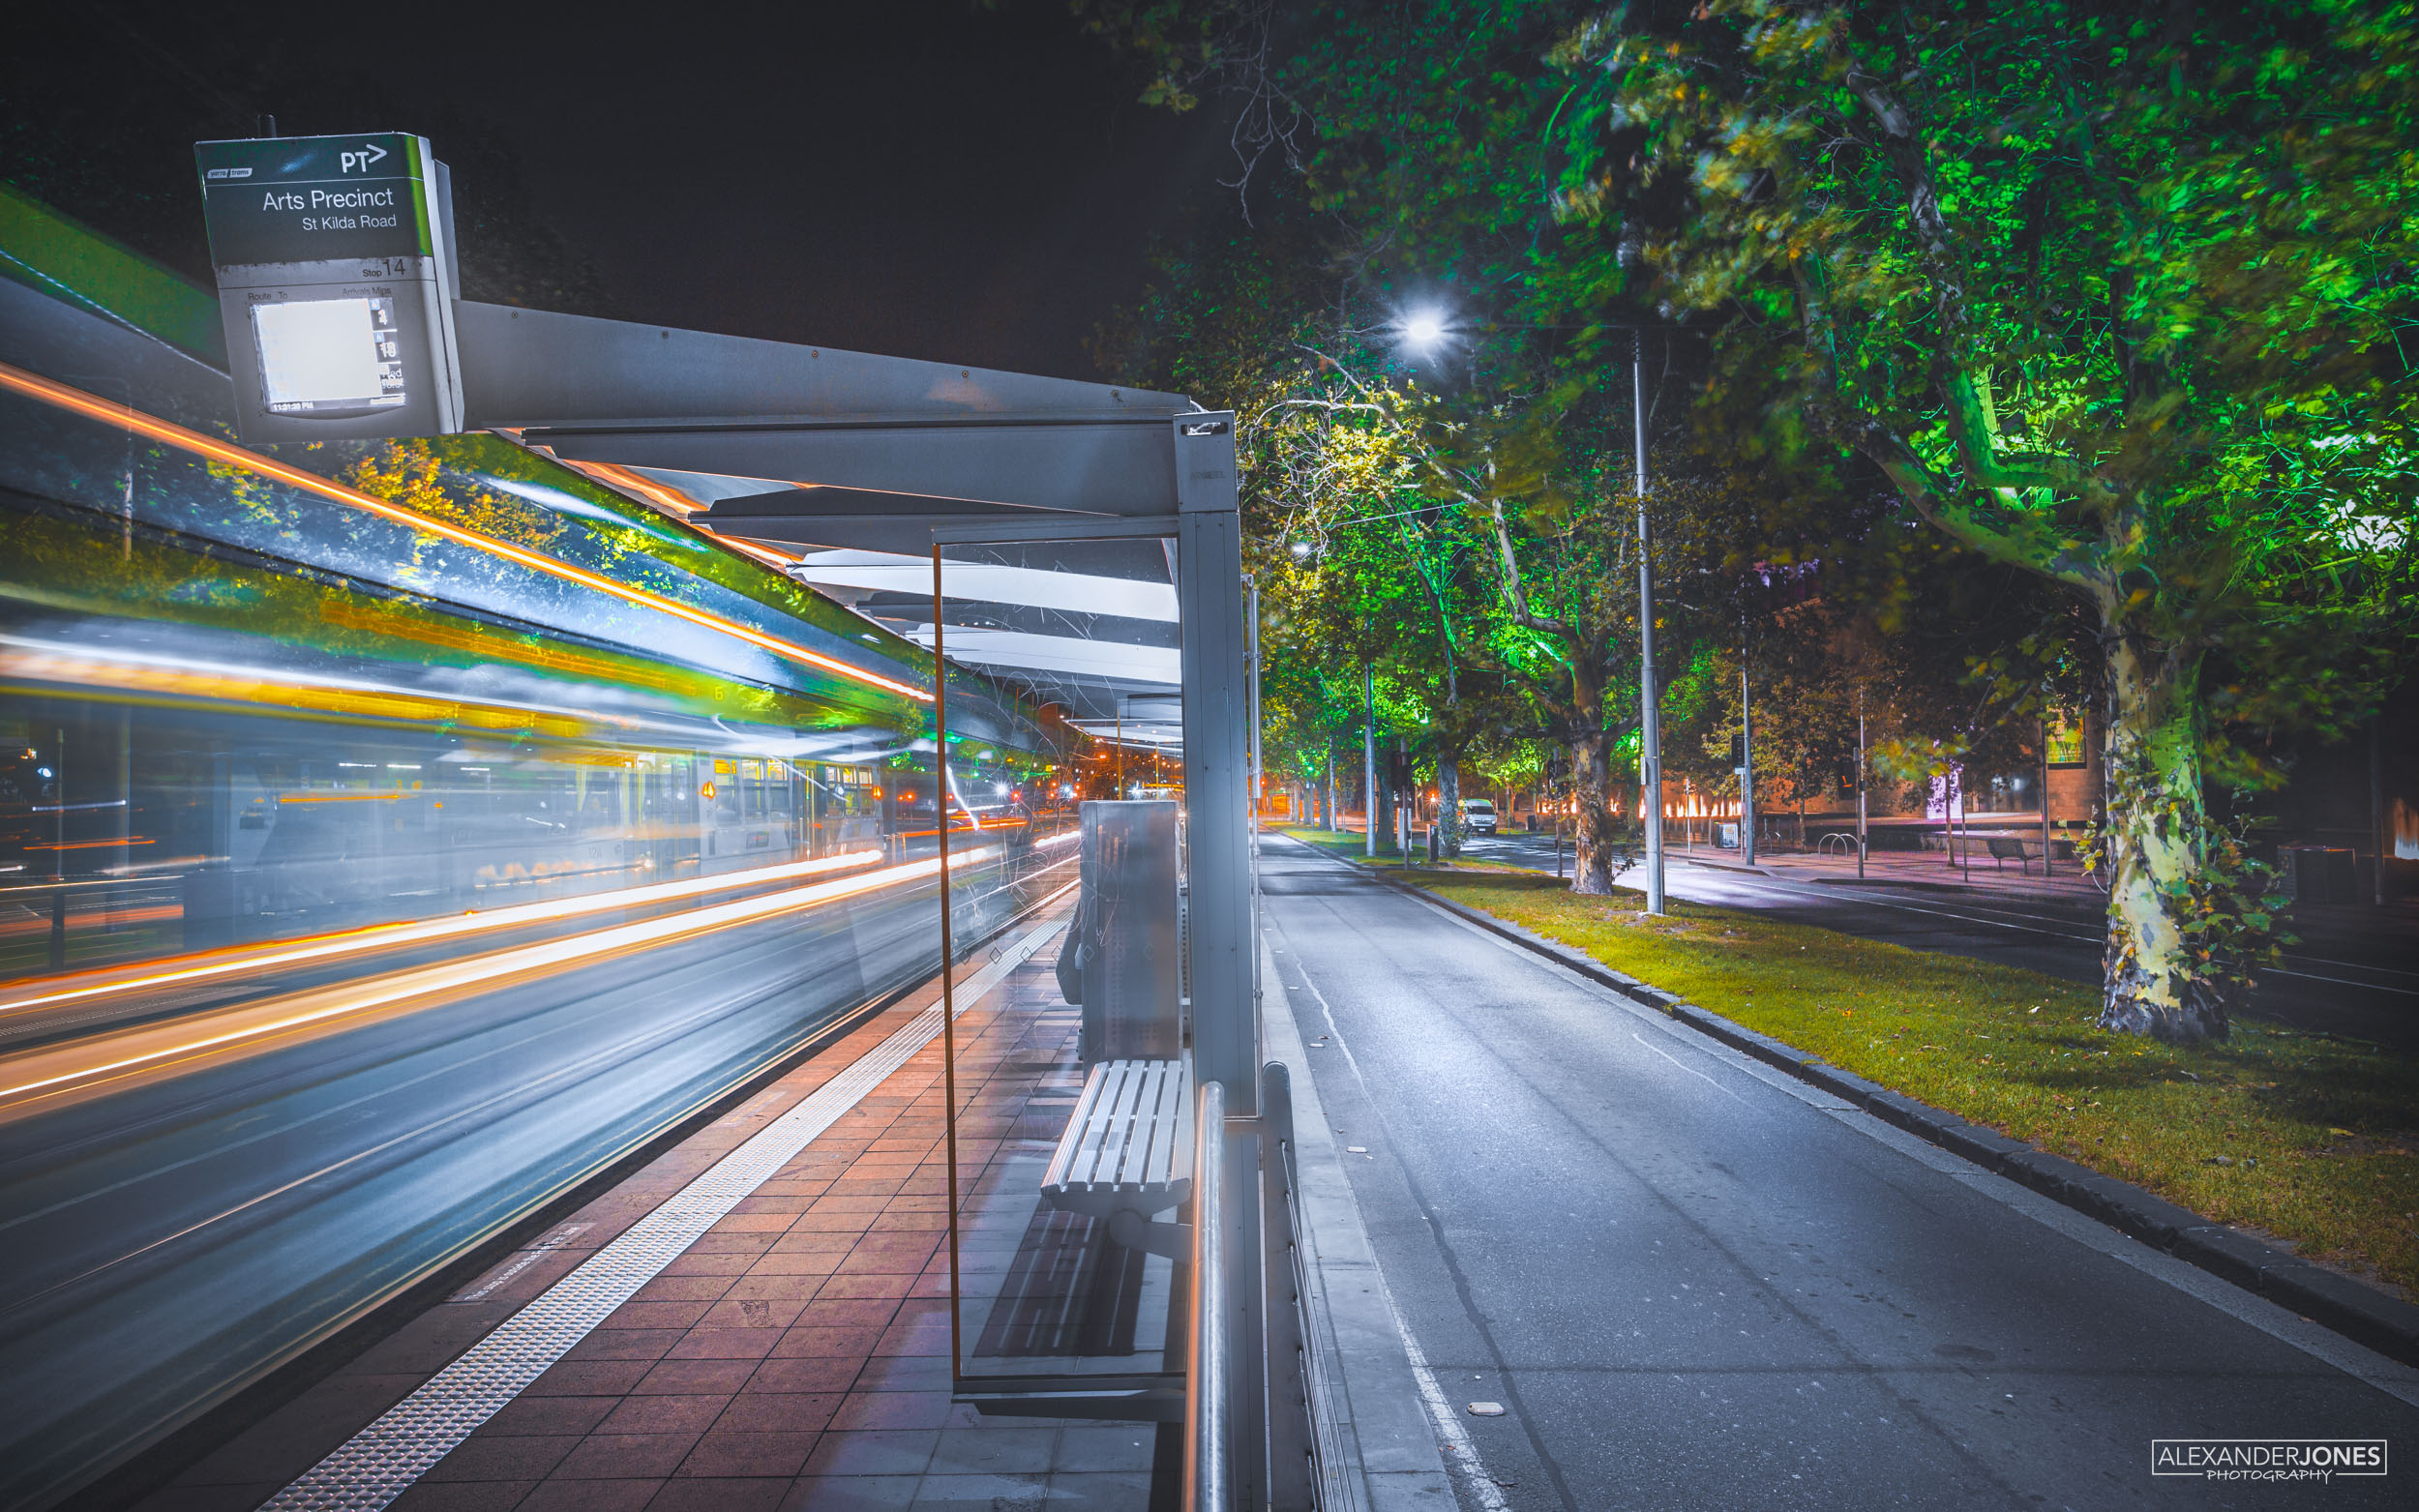 A Melbourne Metro tram in long exposure with vivid futuristic colors pulling out of a station in Melbourne, Australia